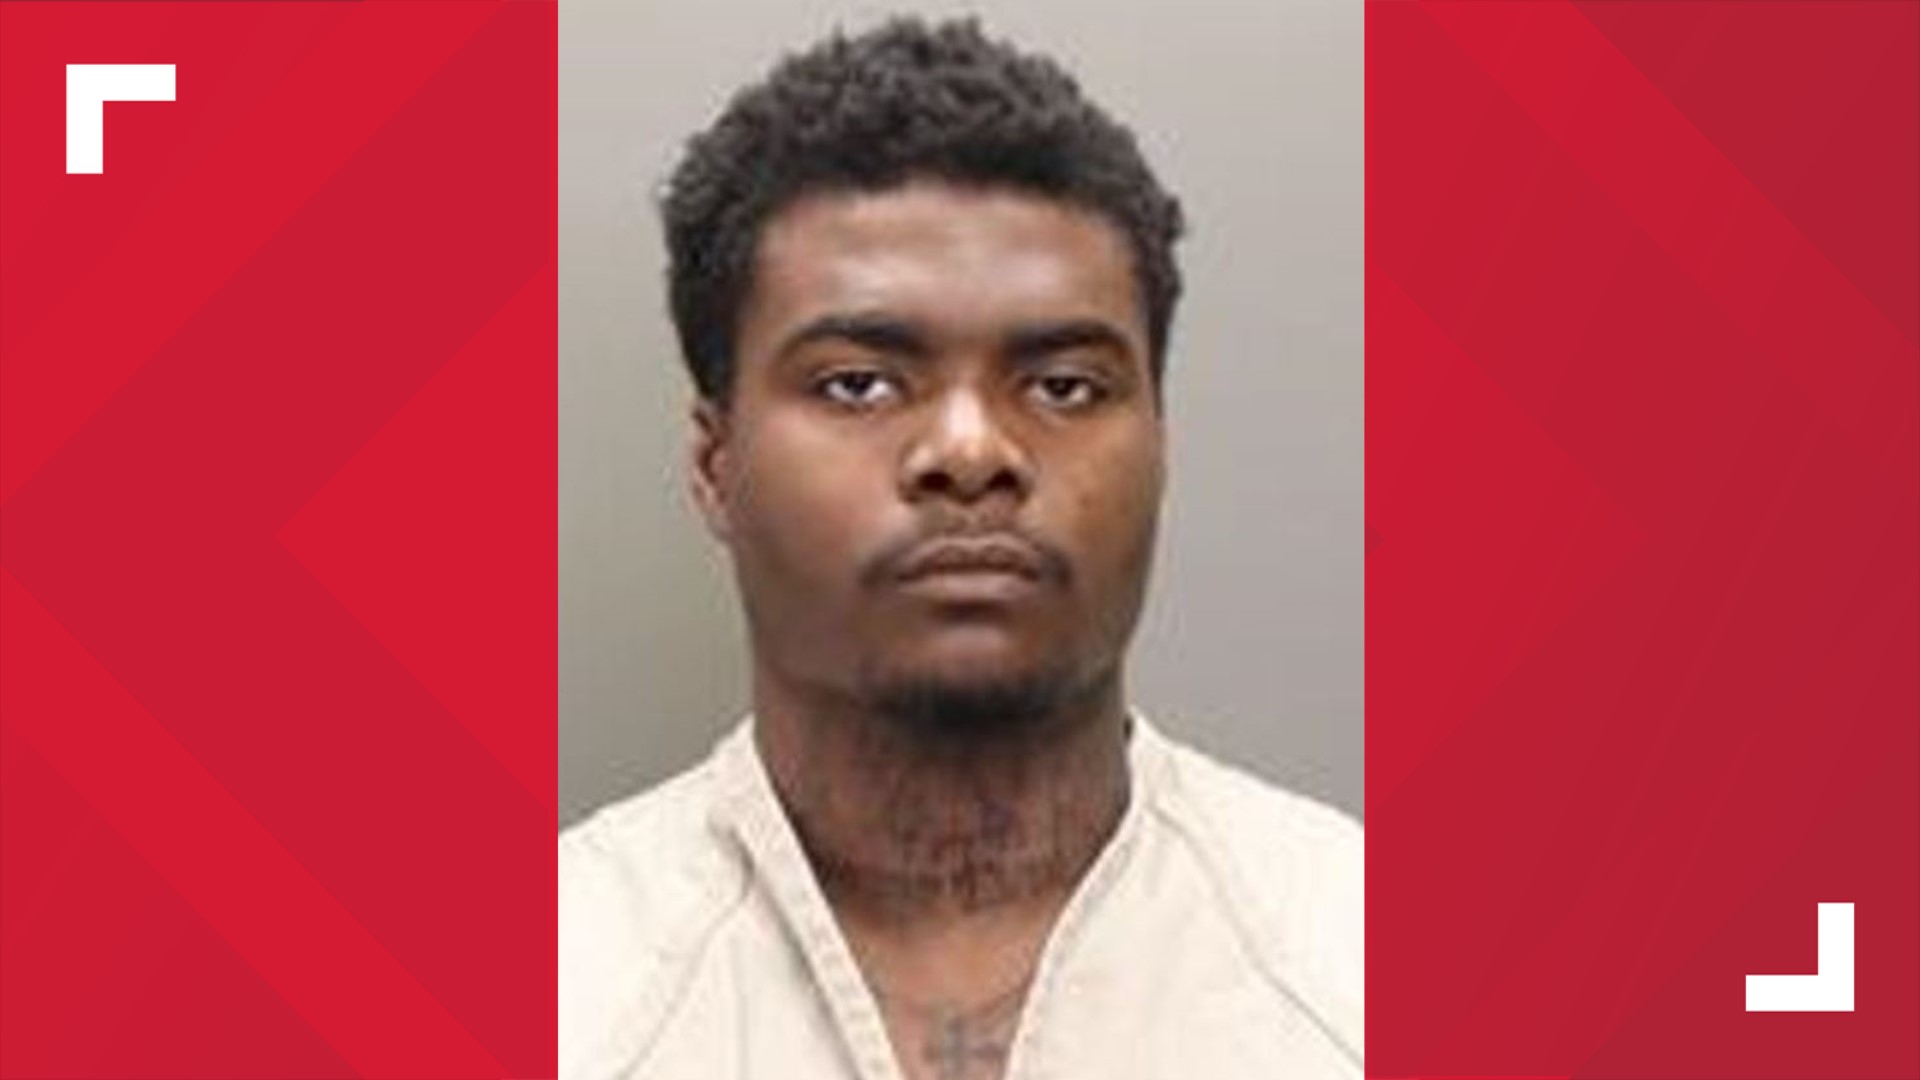 John Rash, 23, is charged with reckless homicide and possession of drugs in connection to the shooting death of 64-year-old William Caslin.